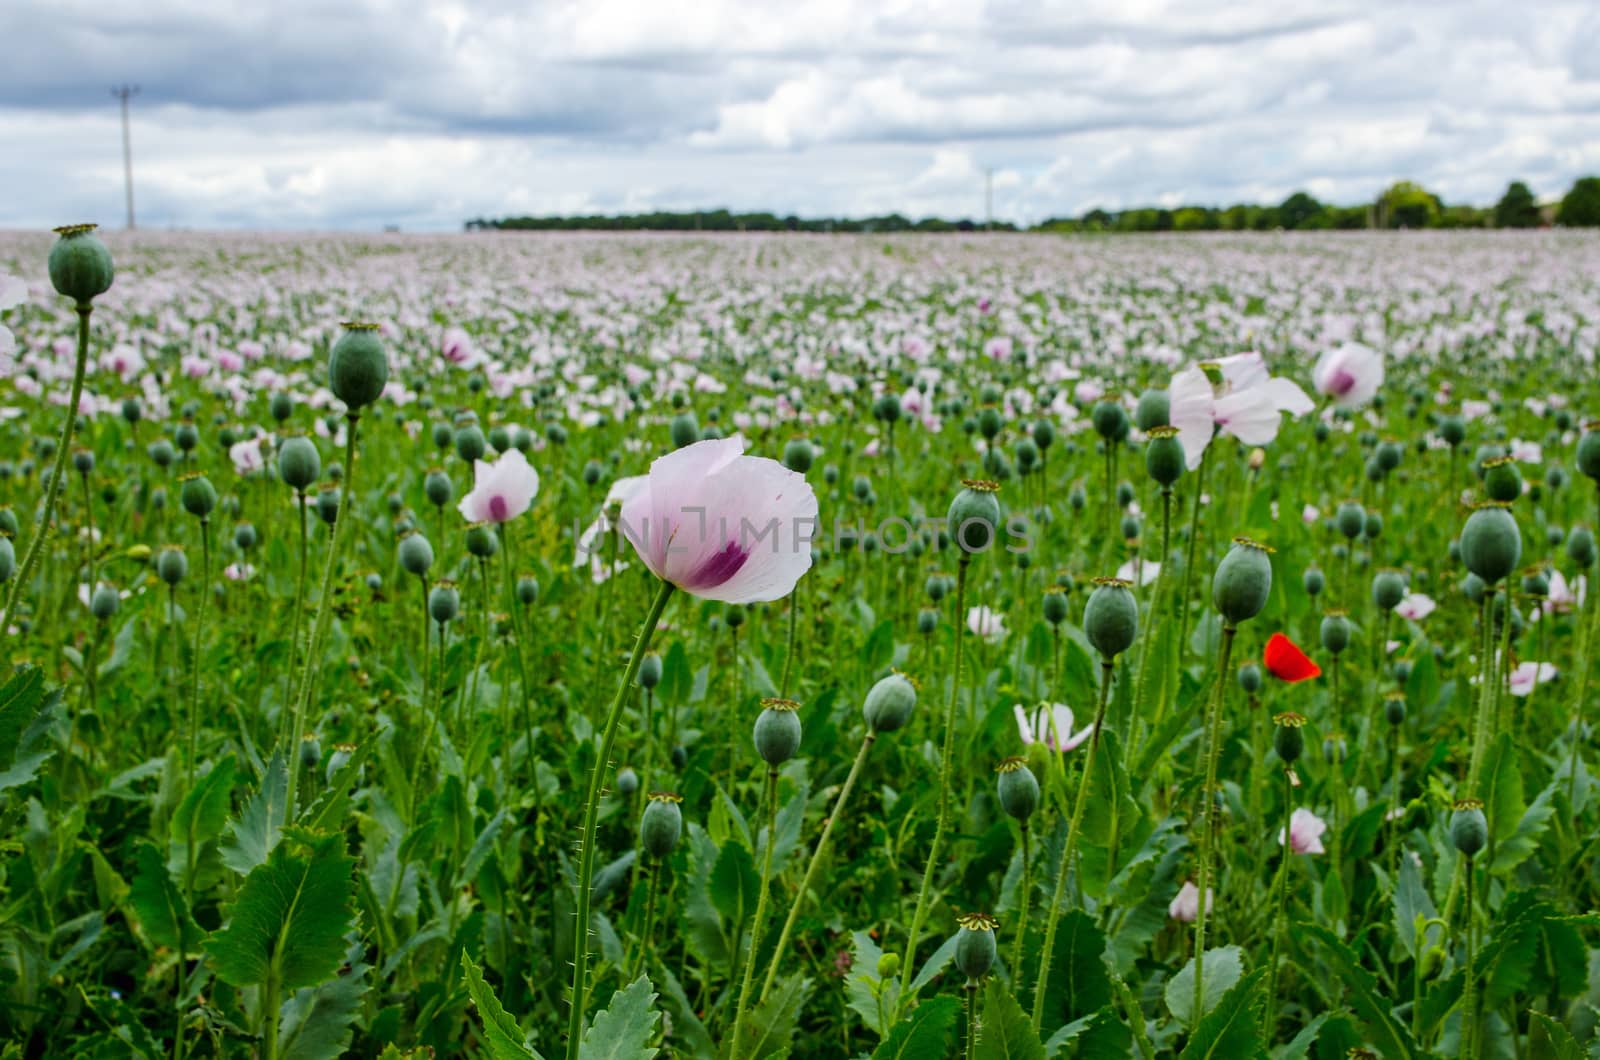 View of the edge of a field of opium poppies, latin name Papaver somniferum, growing on a farm in Hampshire, UK.  The crop is used to produce medicinal morphine for the pharmaceutical industry.